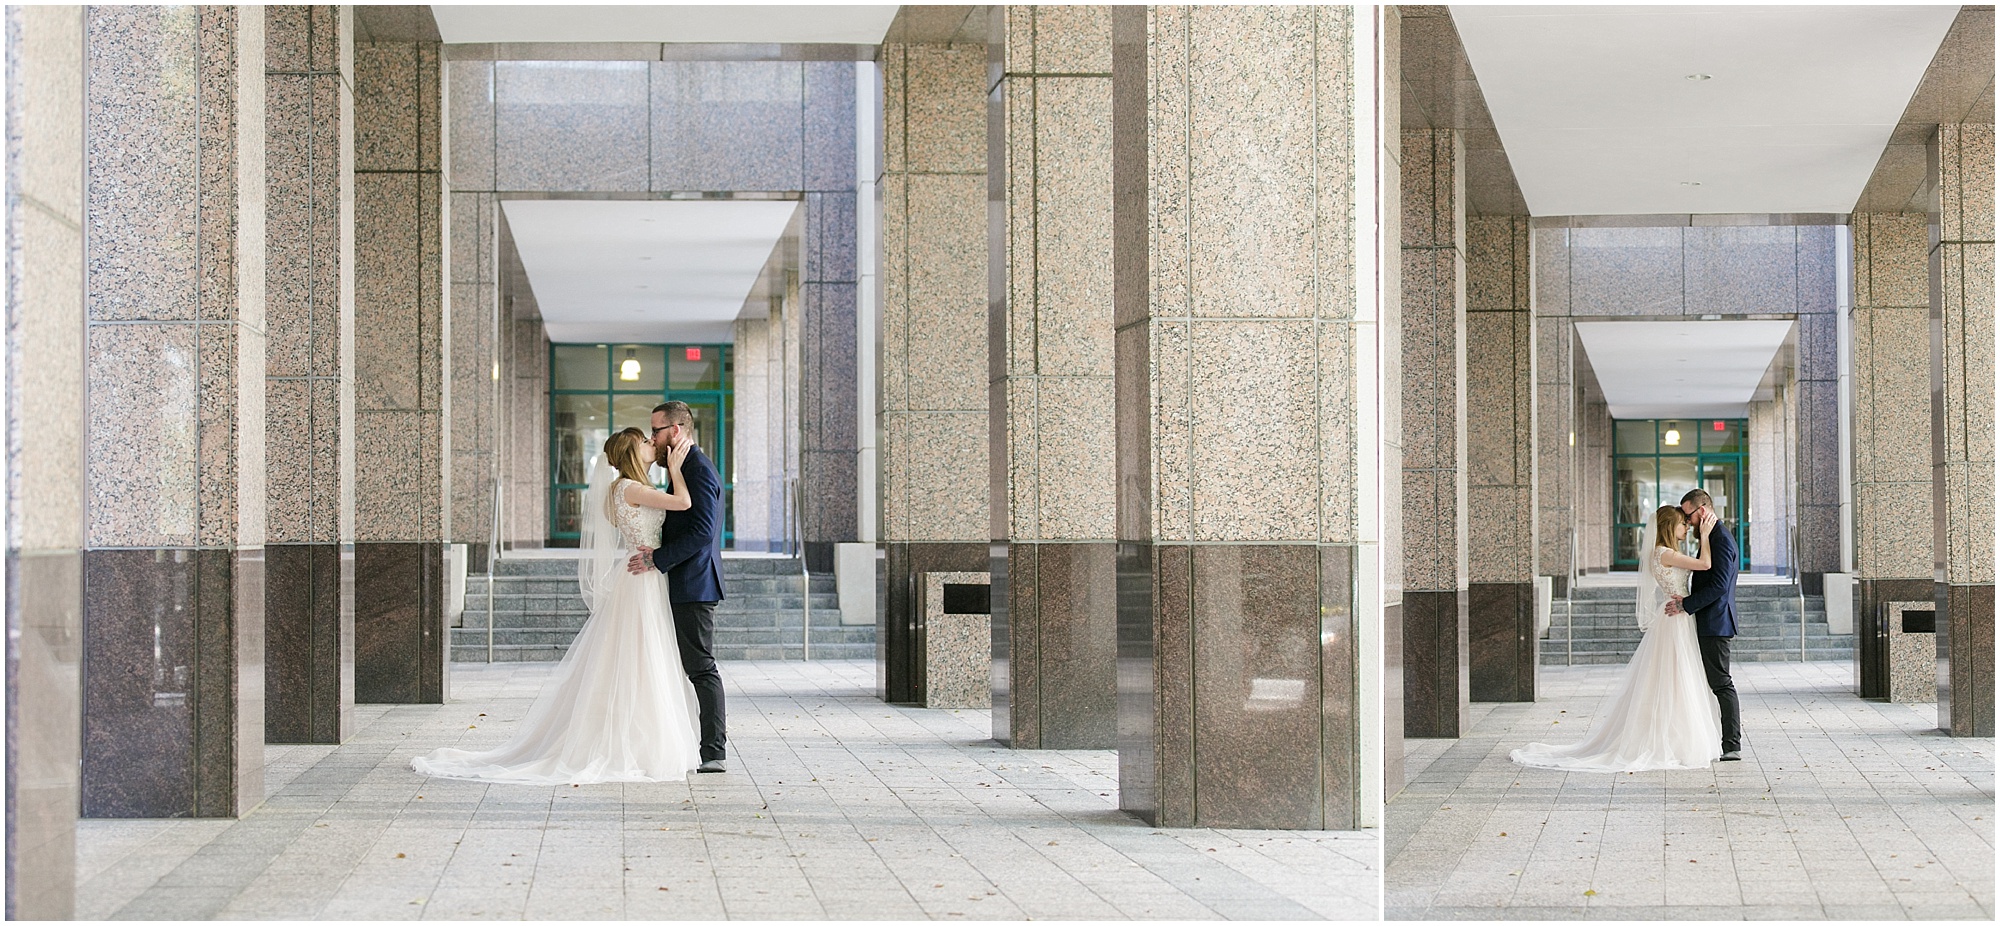 Couple kissing in a breezeway at a building in downtown Orlando.